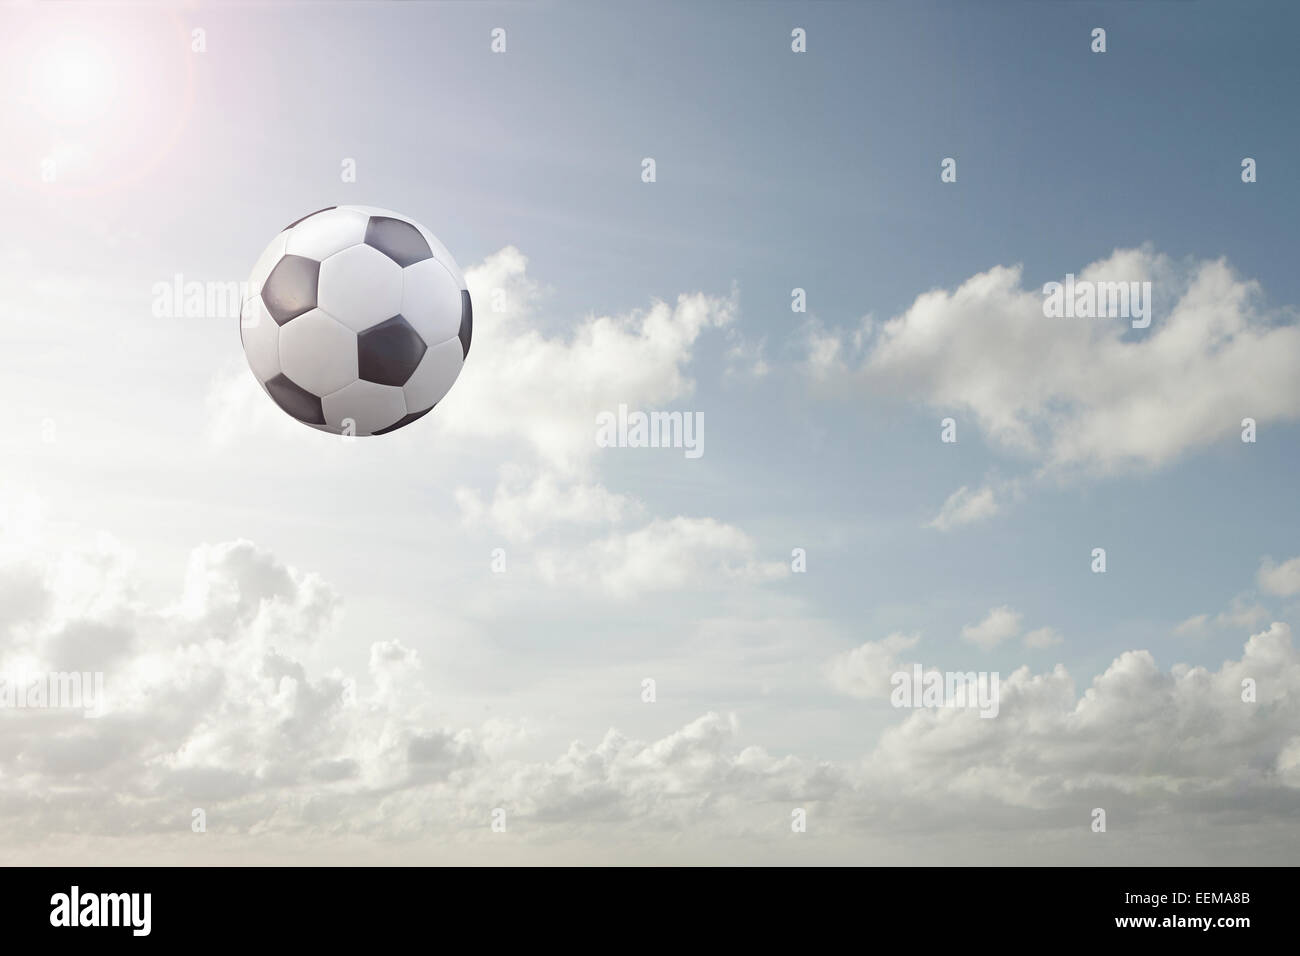 Soccer ball flying in cloudy sky Stock Photo